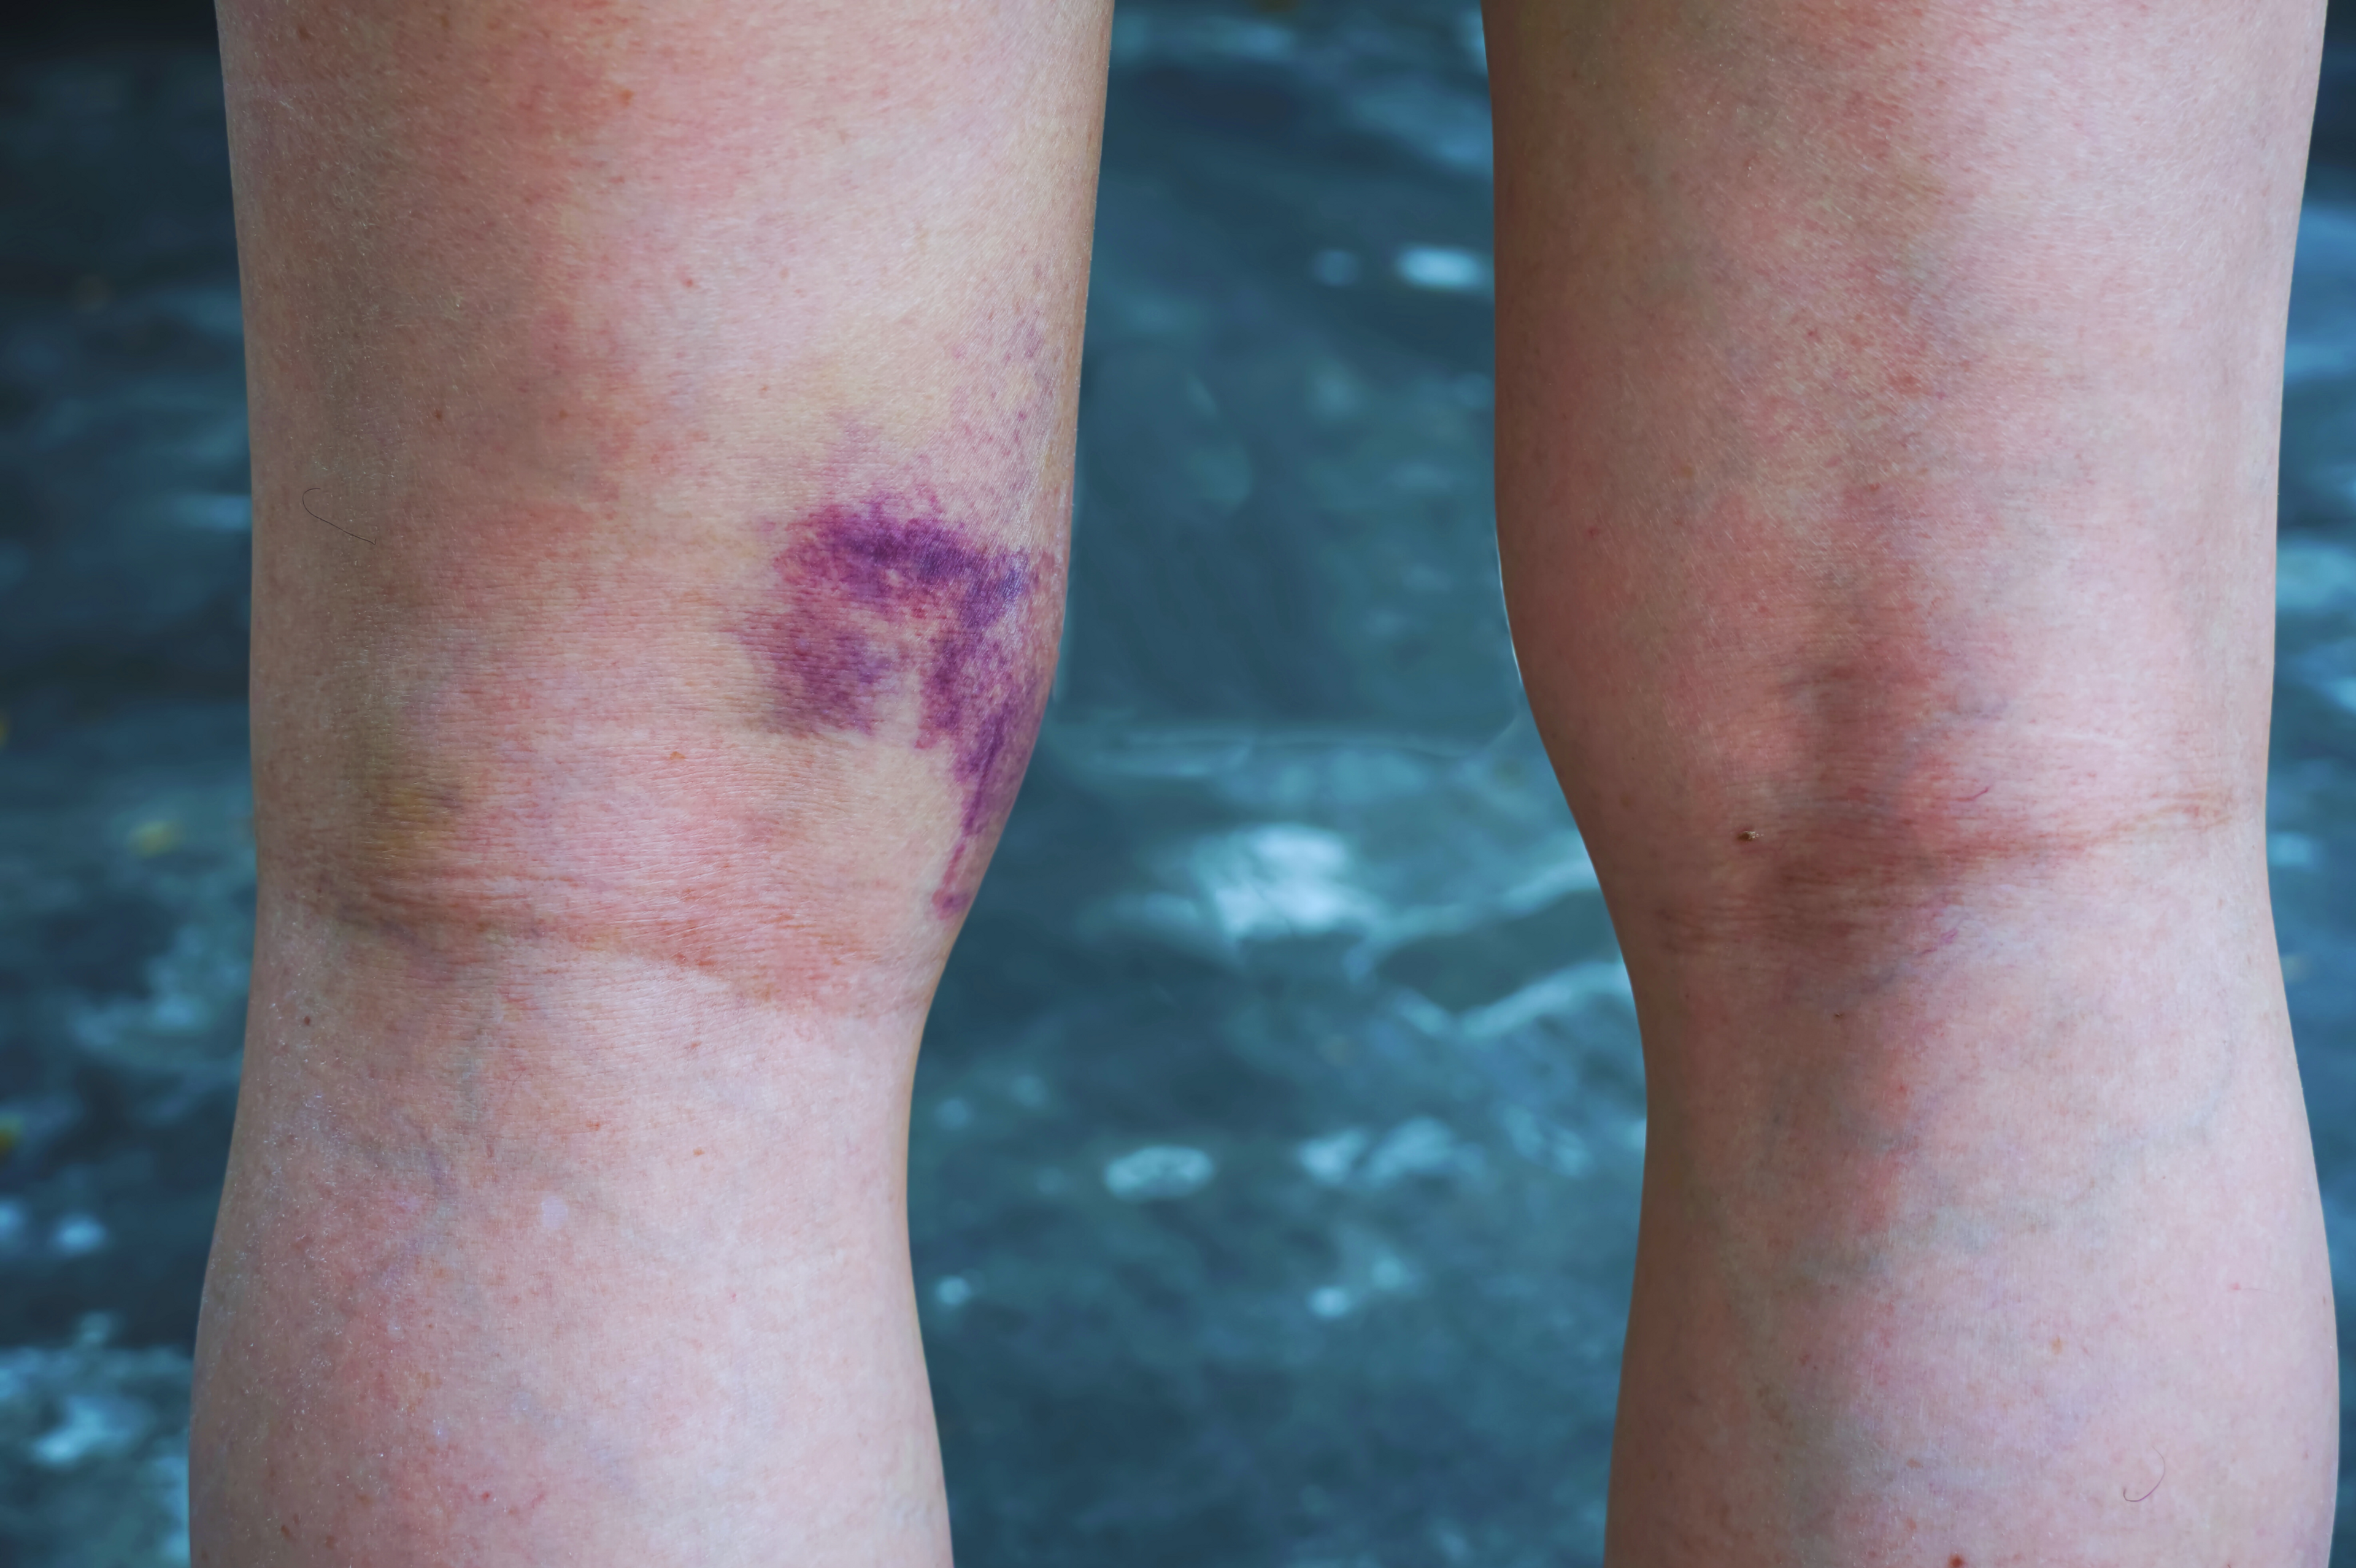 When you pull a hamstring, the bruise often shows lower down the leg.